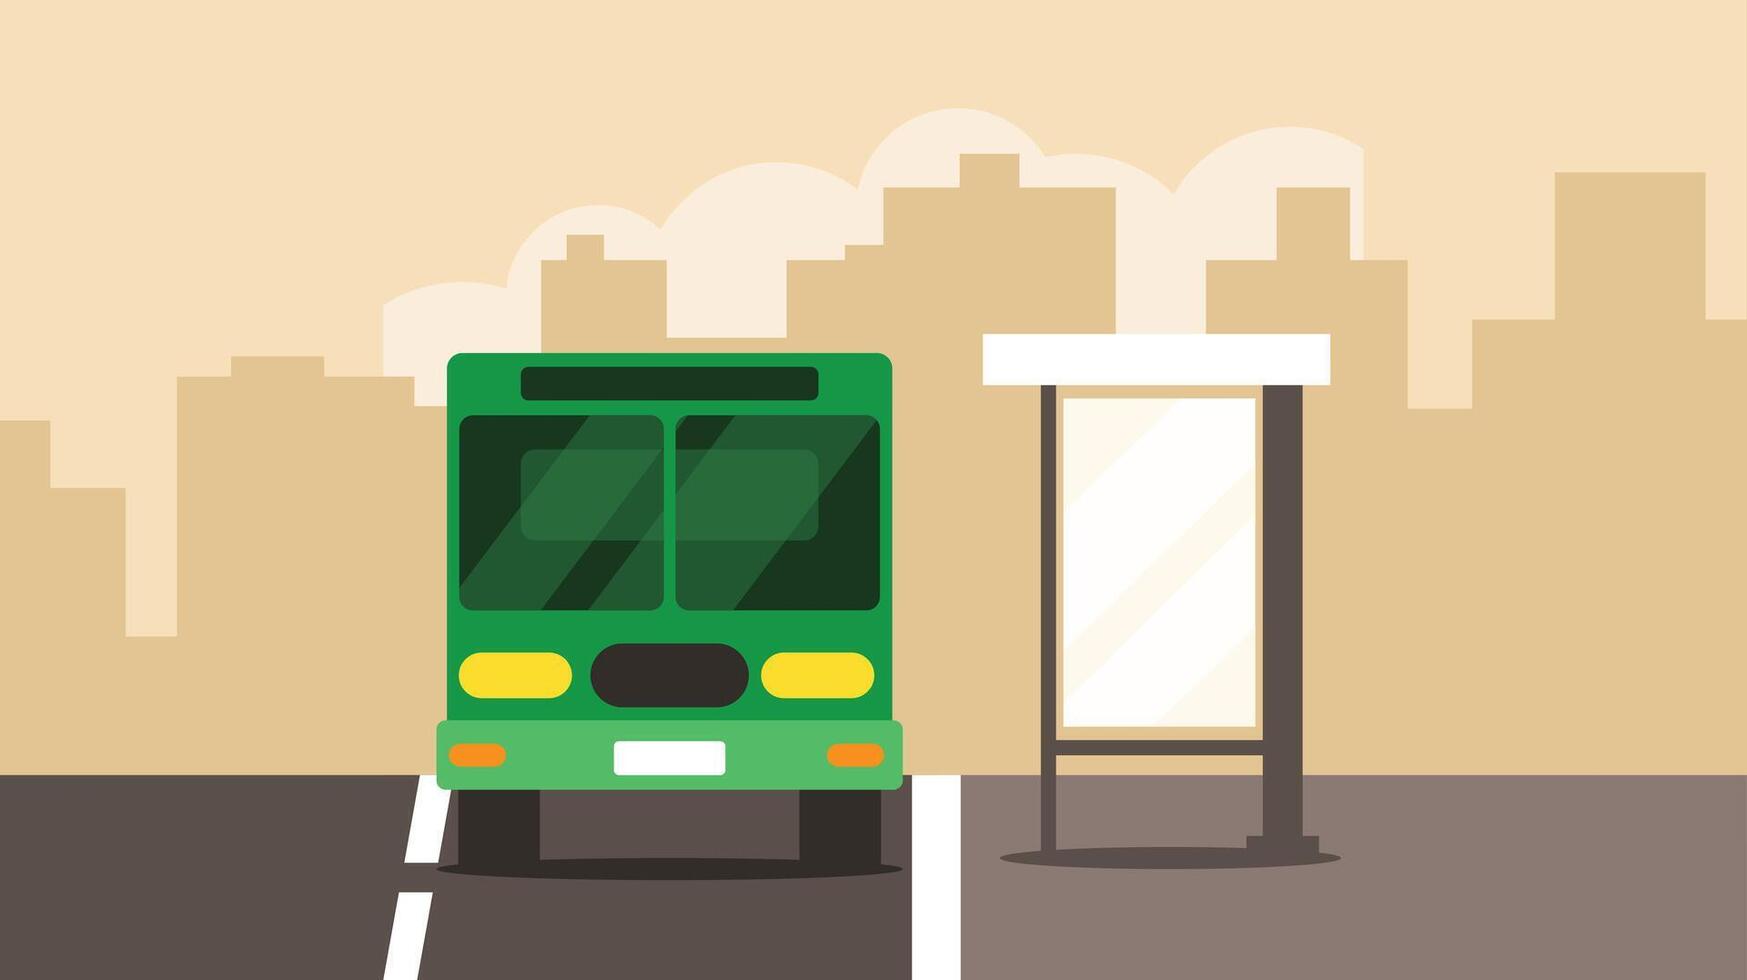 A bus stop in the city street vector illustration